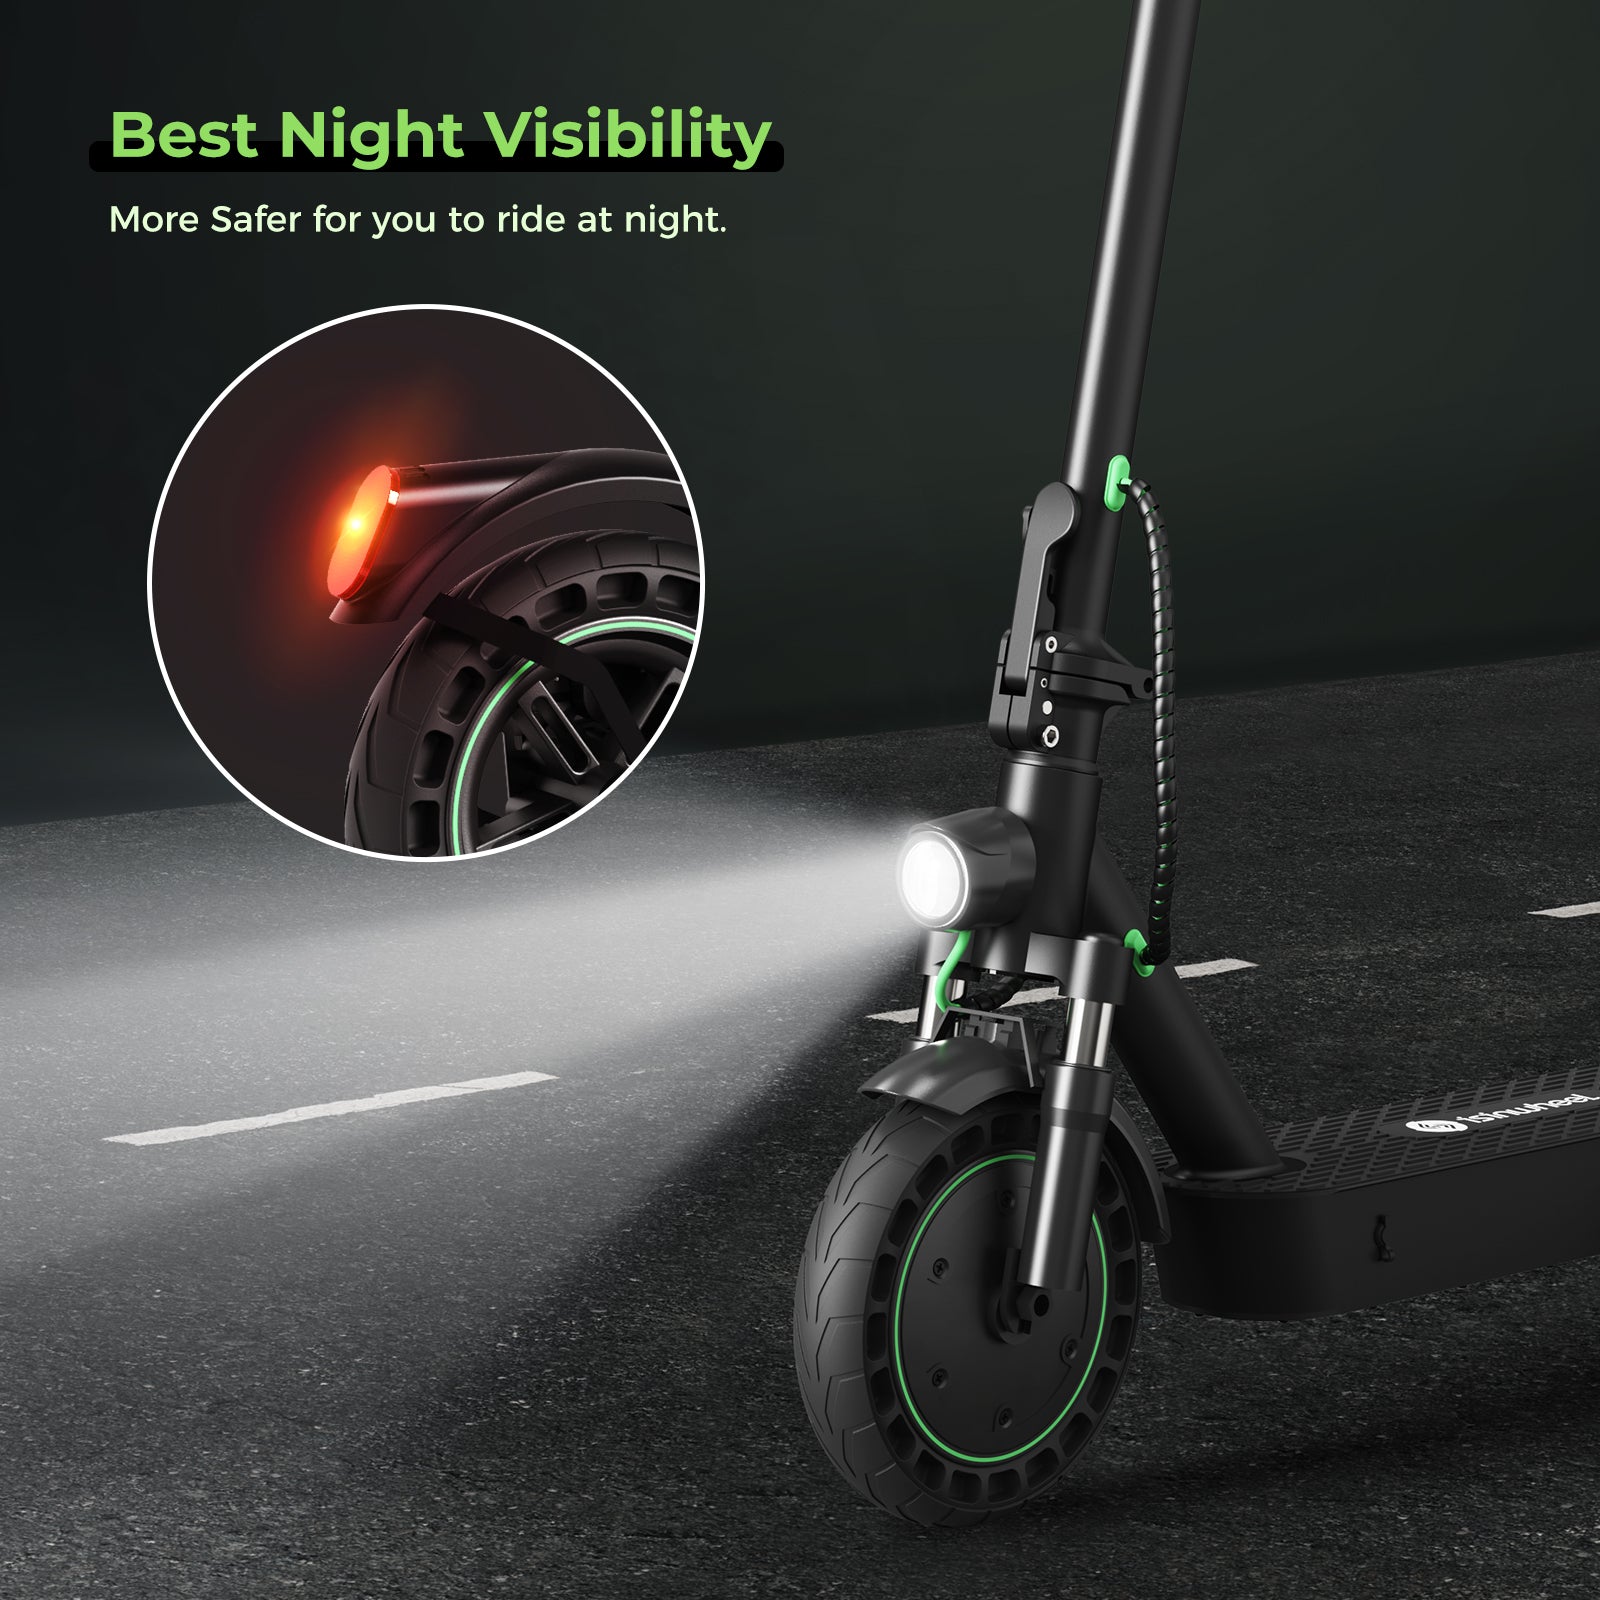 iSinwheel® S9Max 500W Upgraded Electric Scooter iSinwheel Official Store